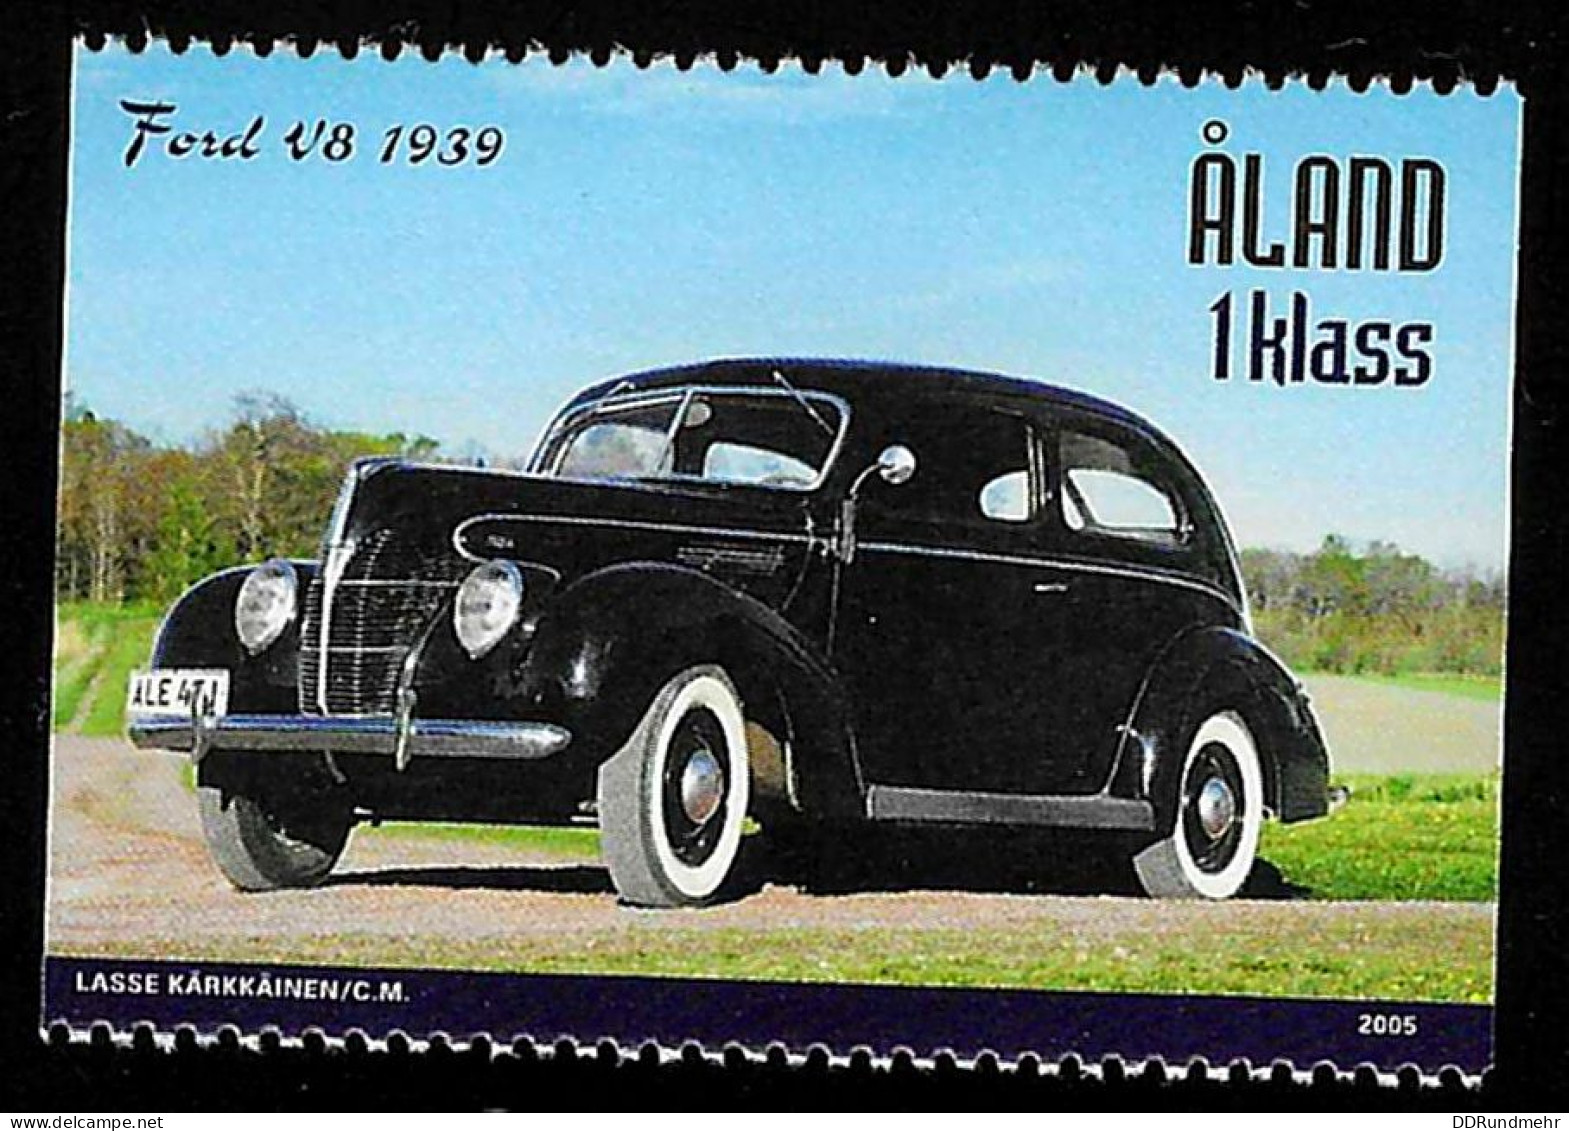 2005 Oldtimer  Michel AX 248 Stamp Number AX 233b Yvert Et Tellier AX 248 Stanley Gibbons AX 263 Xx MNH - Aland